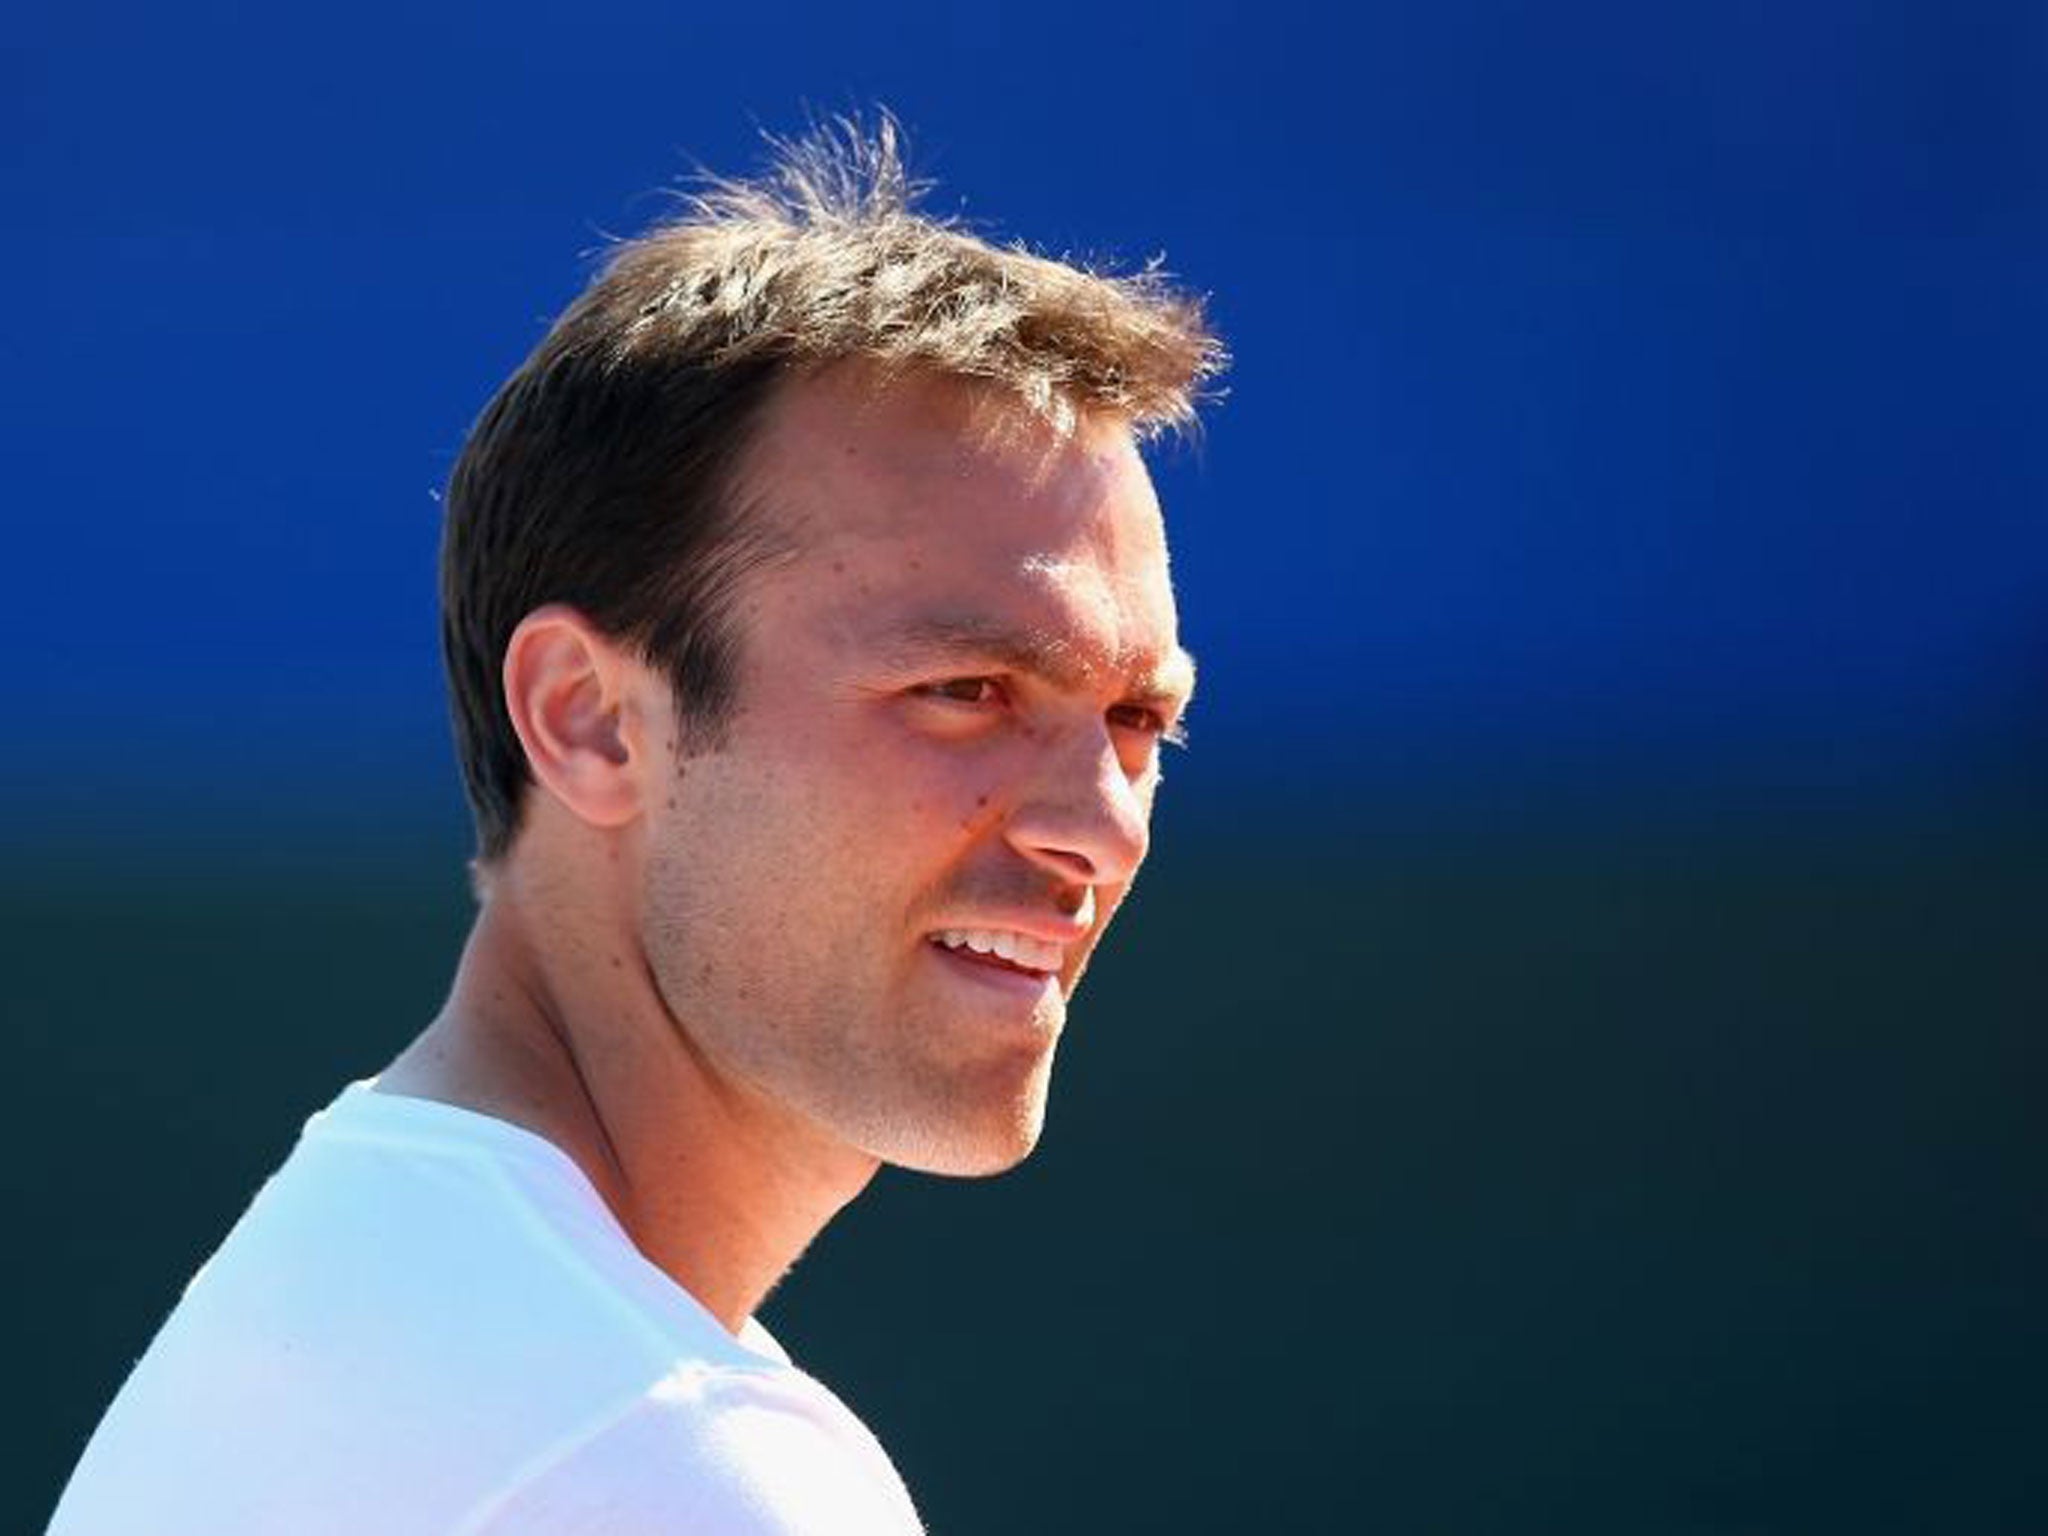 Strong return: Ross Hutchins was diagnosed with cancer a year ago